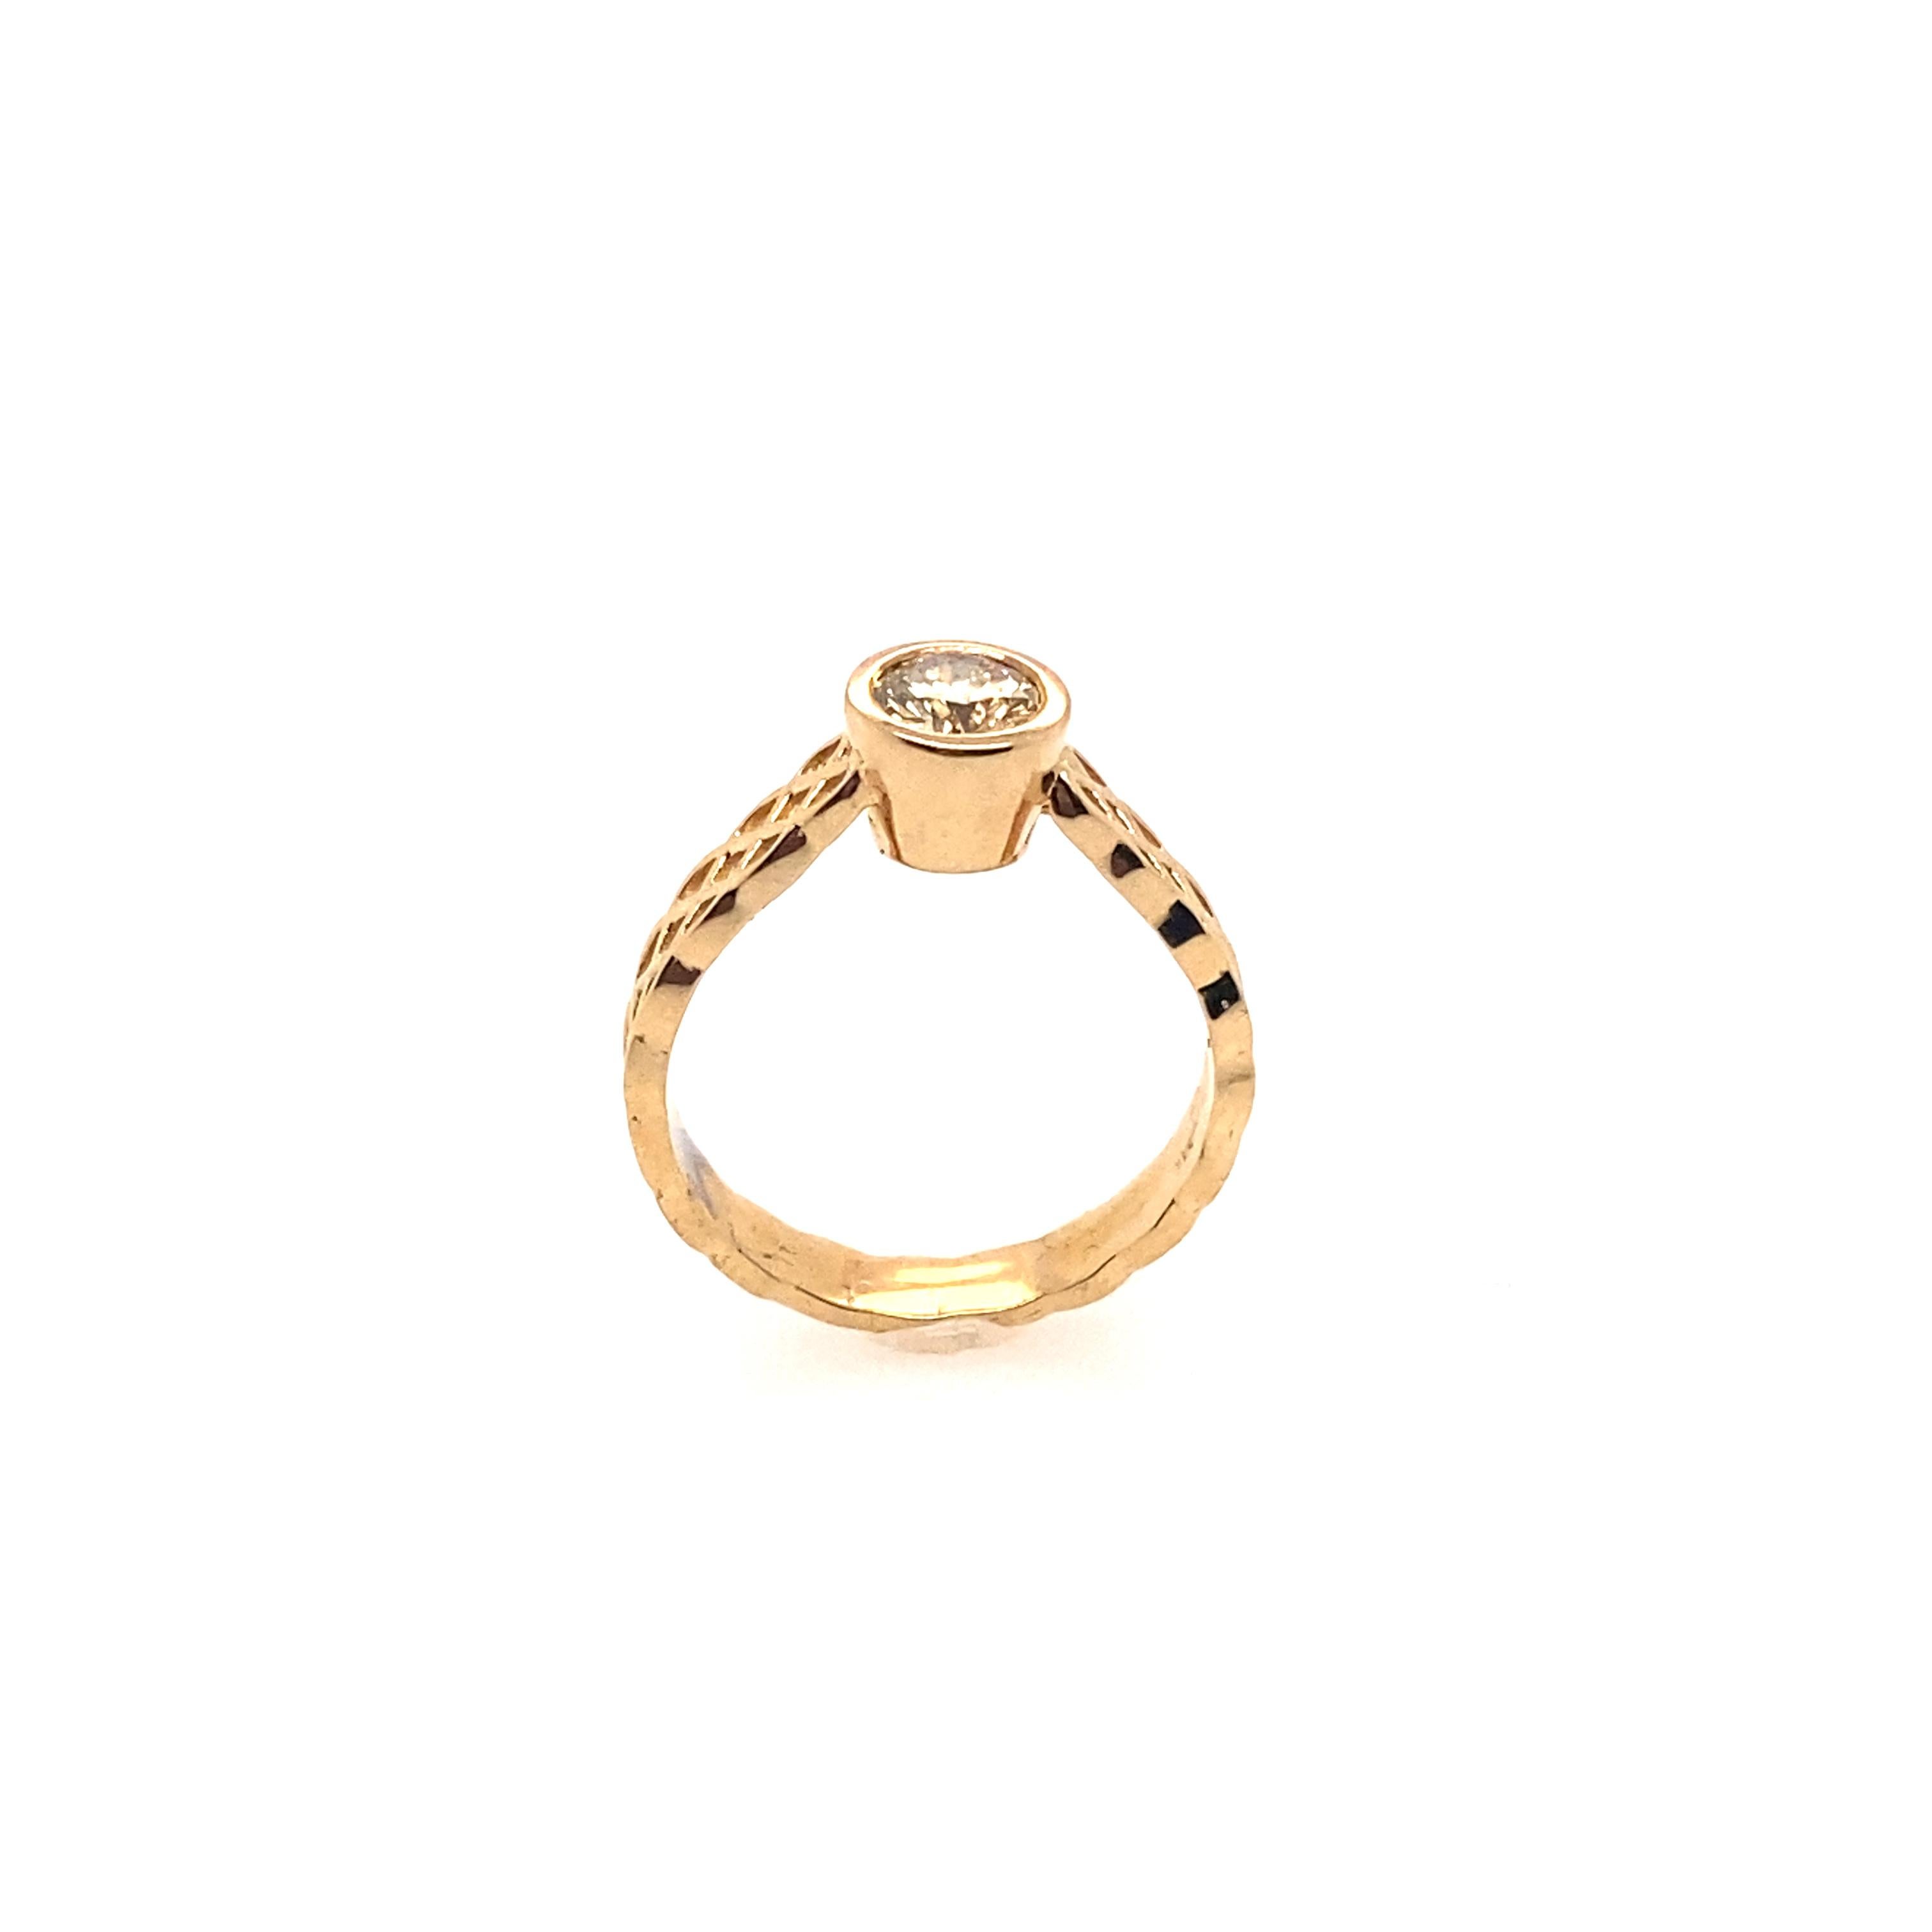 This ring features 0.60 carat fancy brown diamond set in 14K yellow gold. The band is delicate hand engraving and filigree artwork. The ring looks unique and perfect for everyday wear. 

Center Diamond Weight: 0.60 carat
Center Diamond Shape: